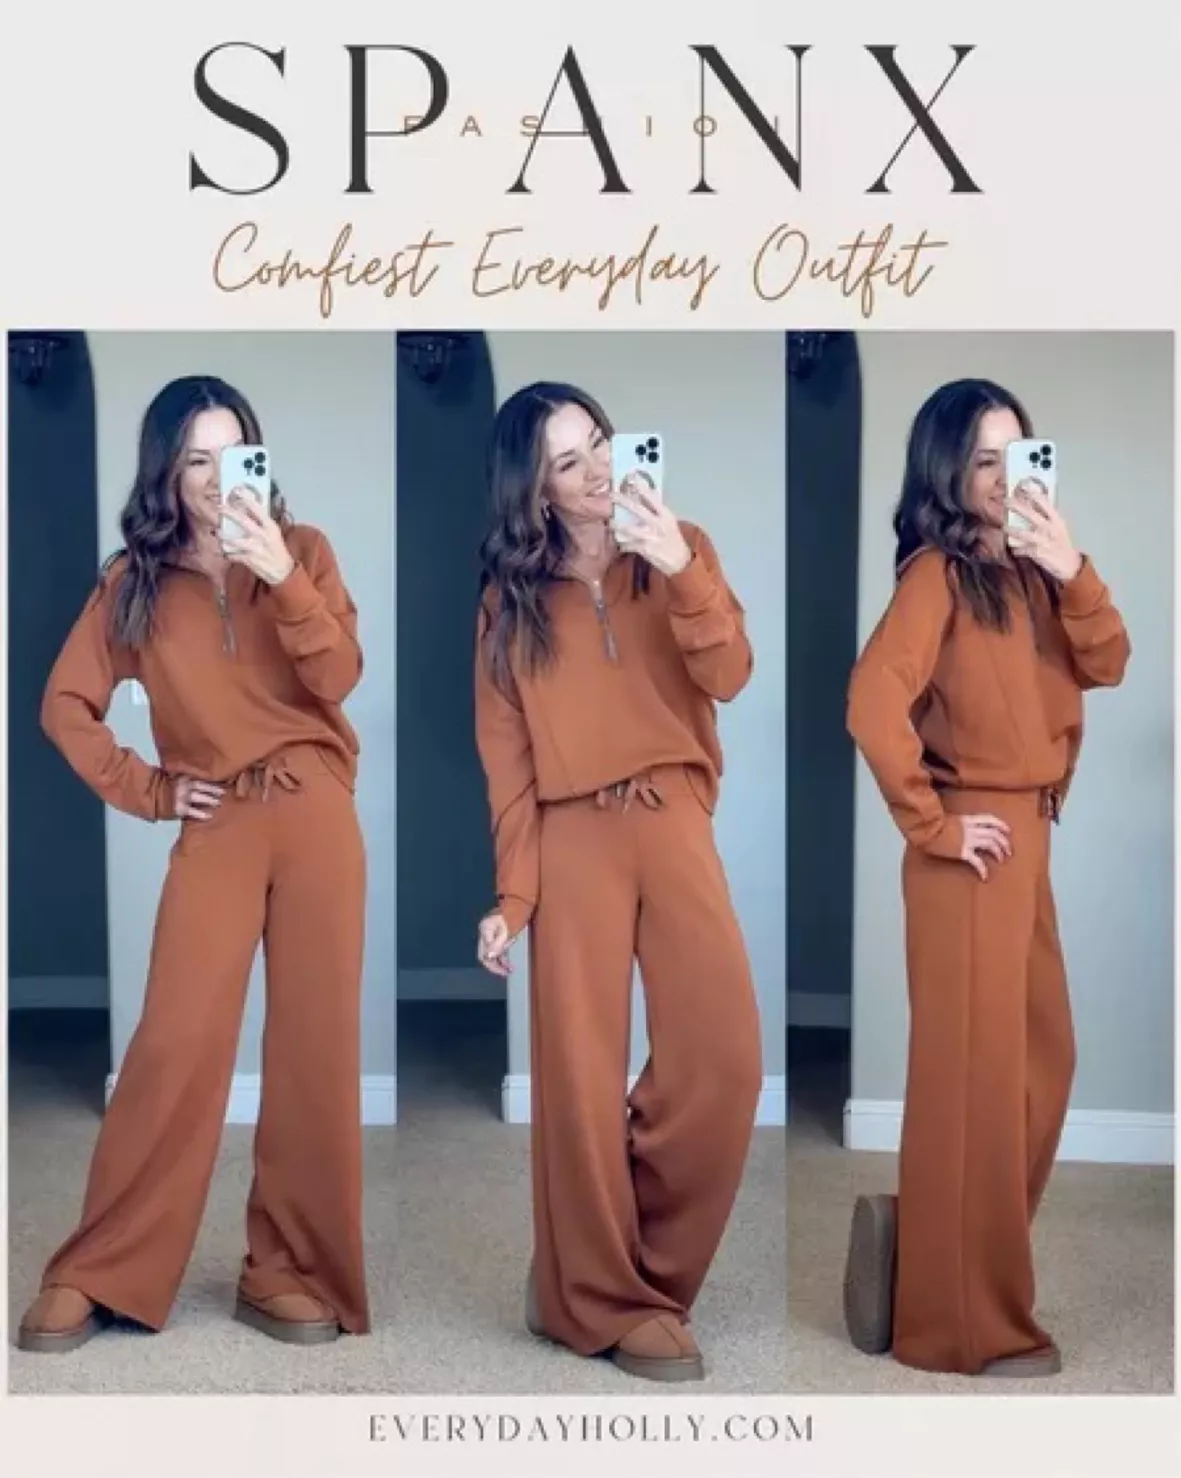 Oprah's 'Favorite' Spanx Pants Are Available in Two New Styles